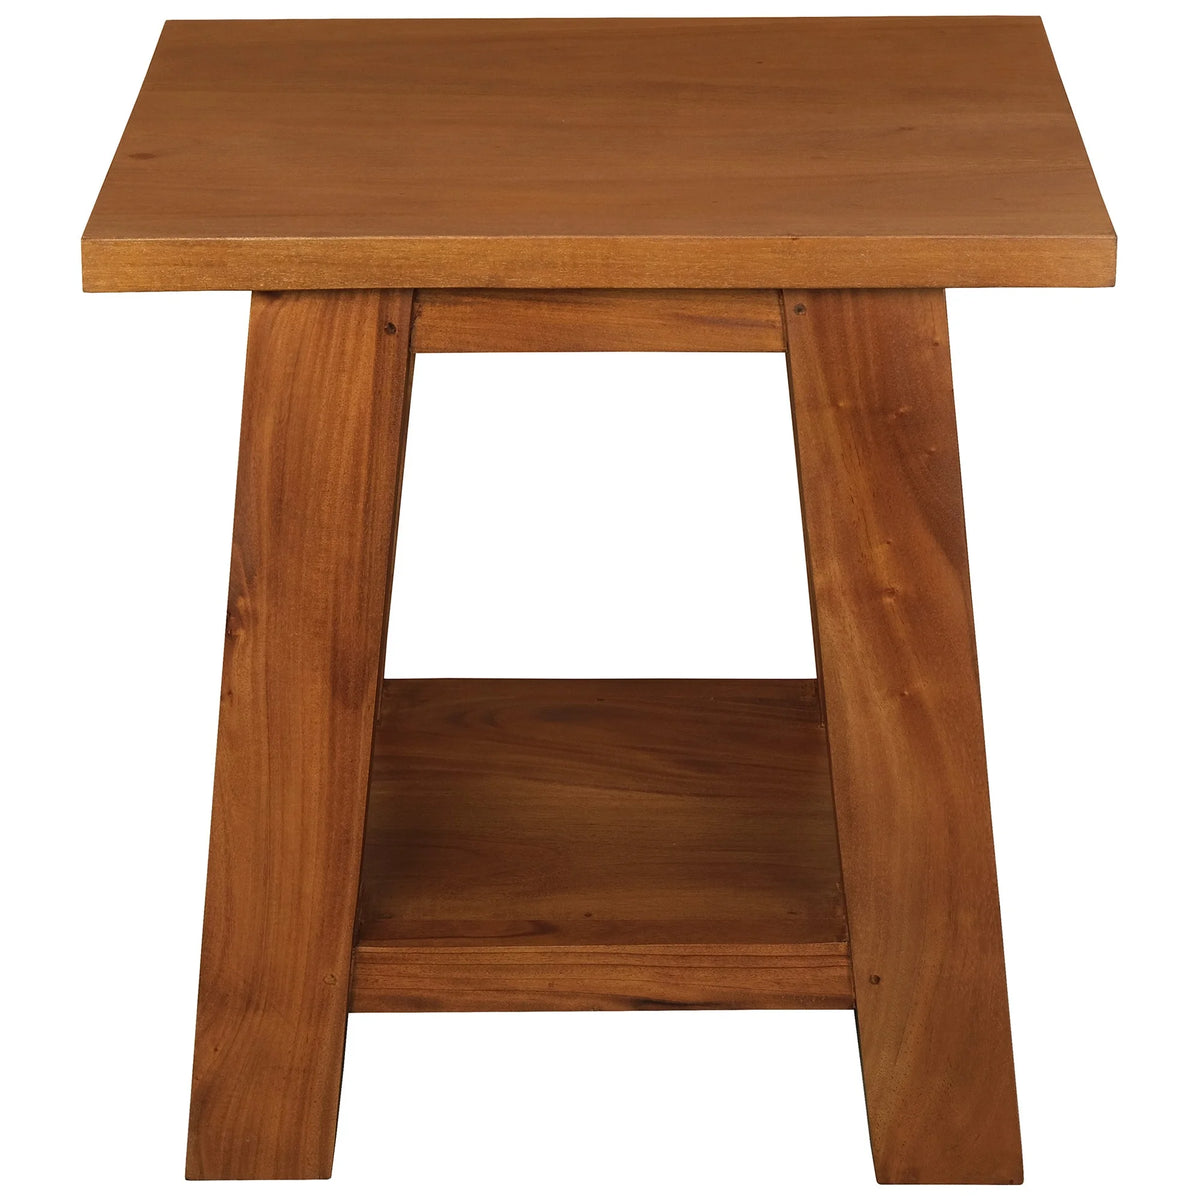 Zimra Solid Timber Lamp Table - Light Pecan - Notbrand